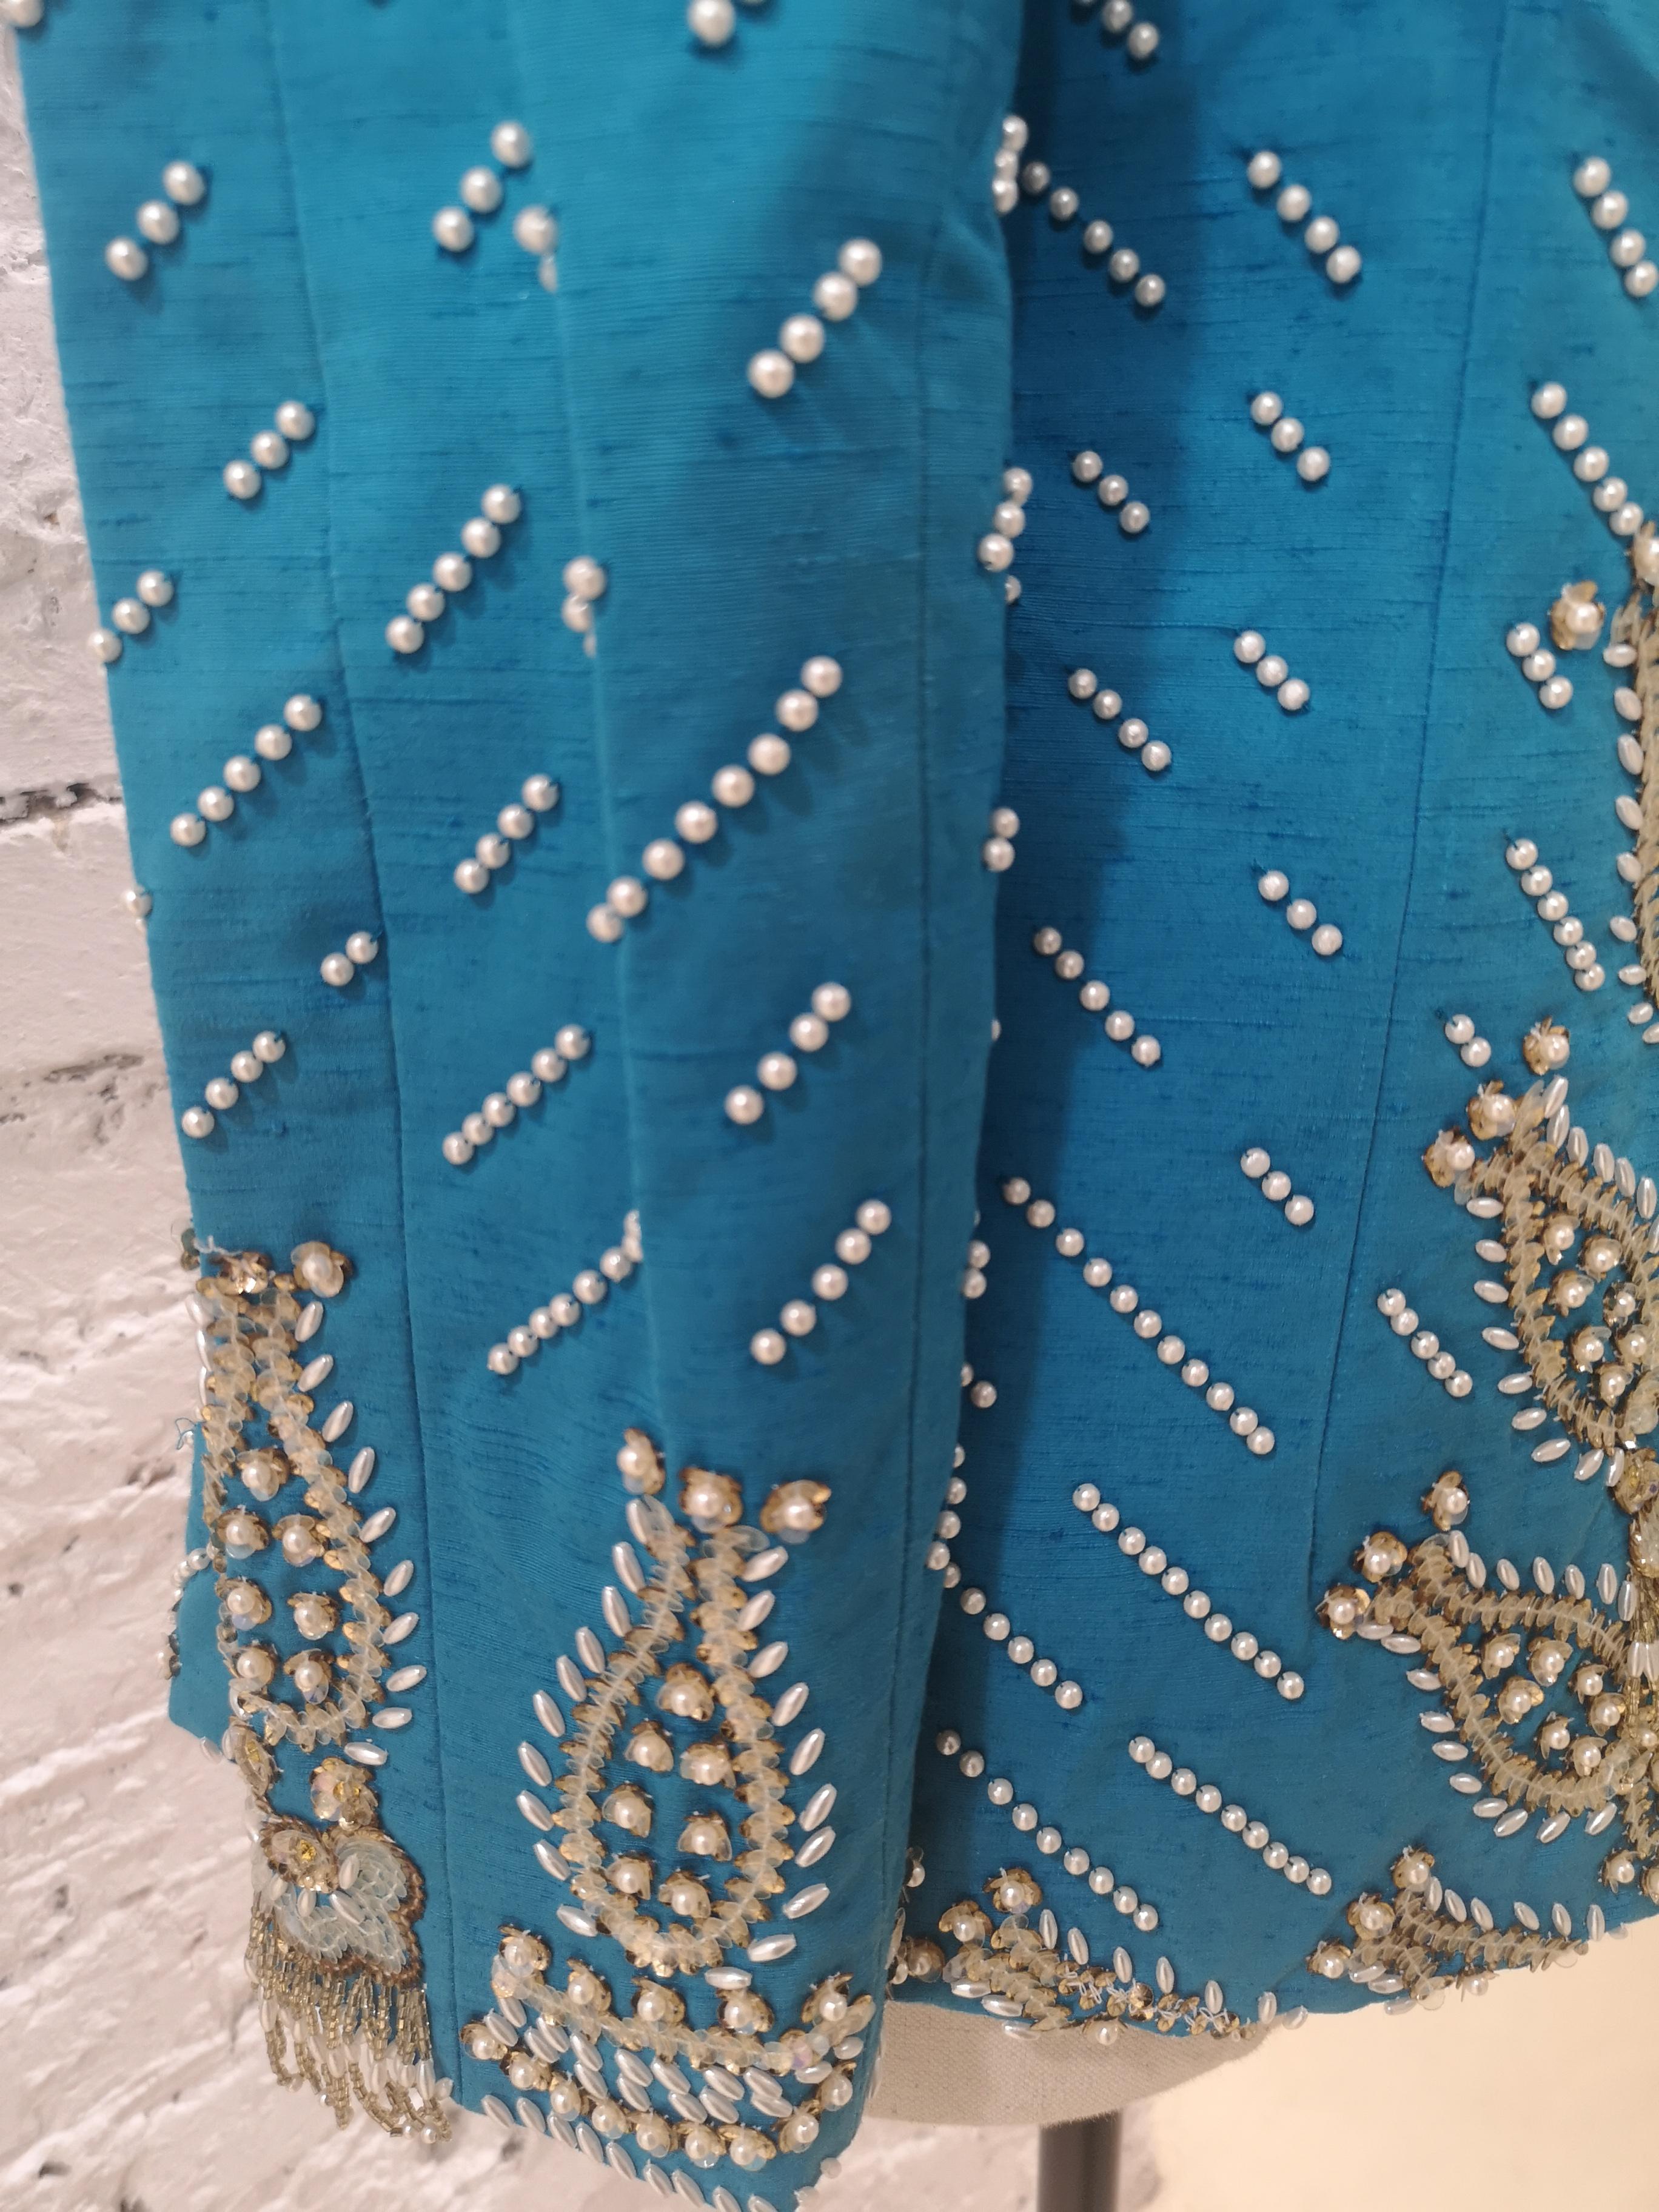 Christian Dior turquoise pearls beads sequins jacket 3